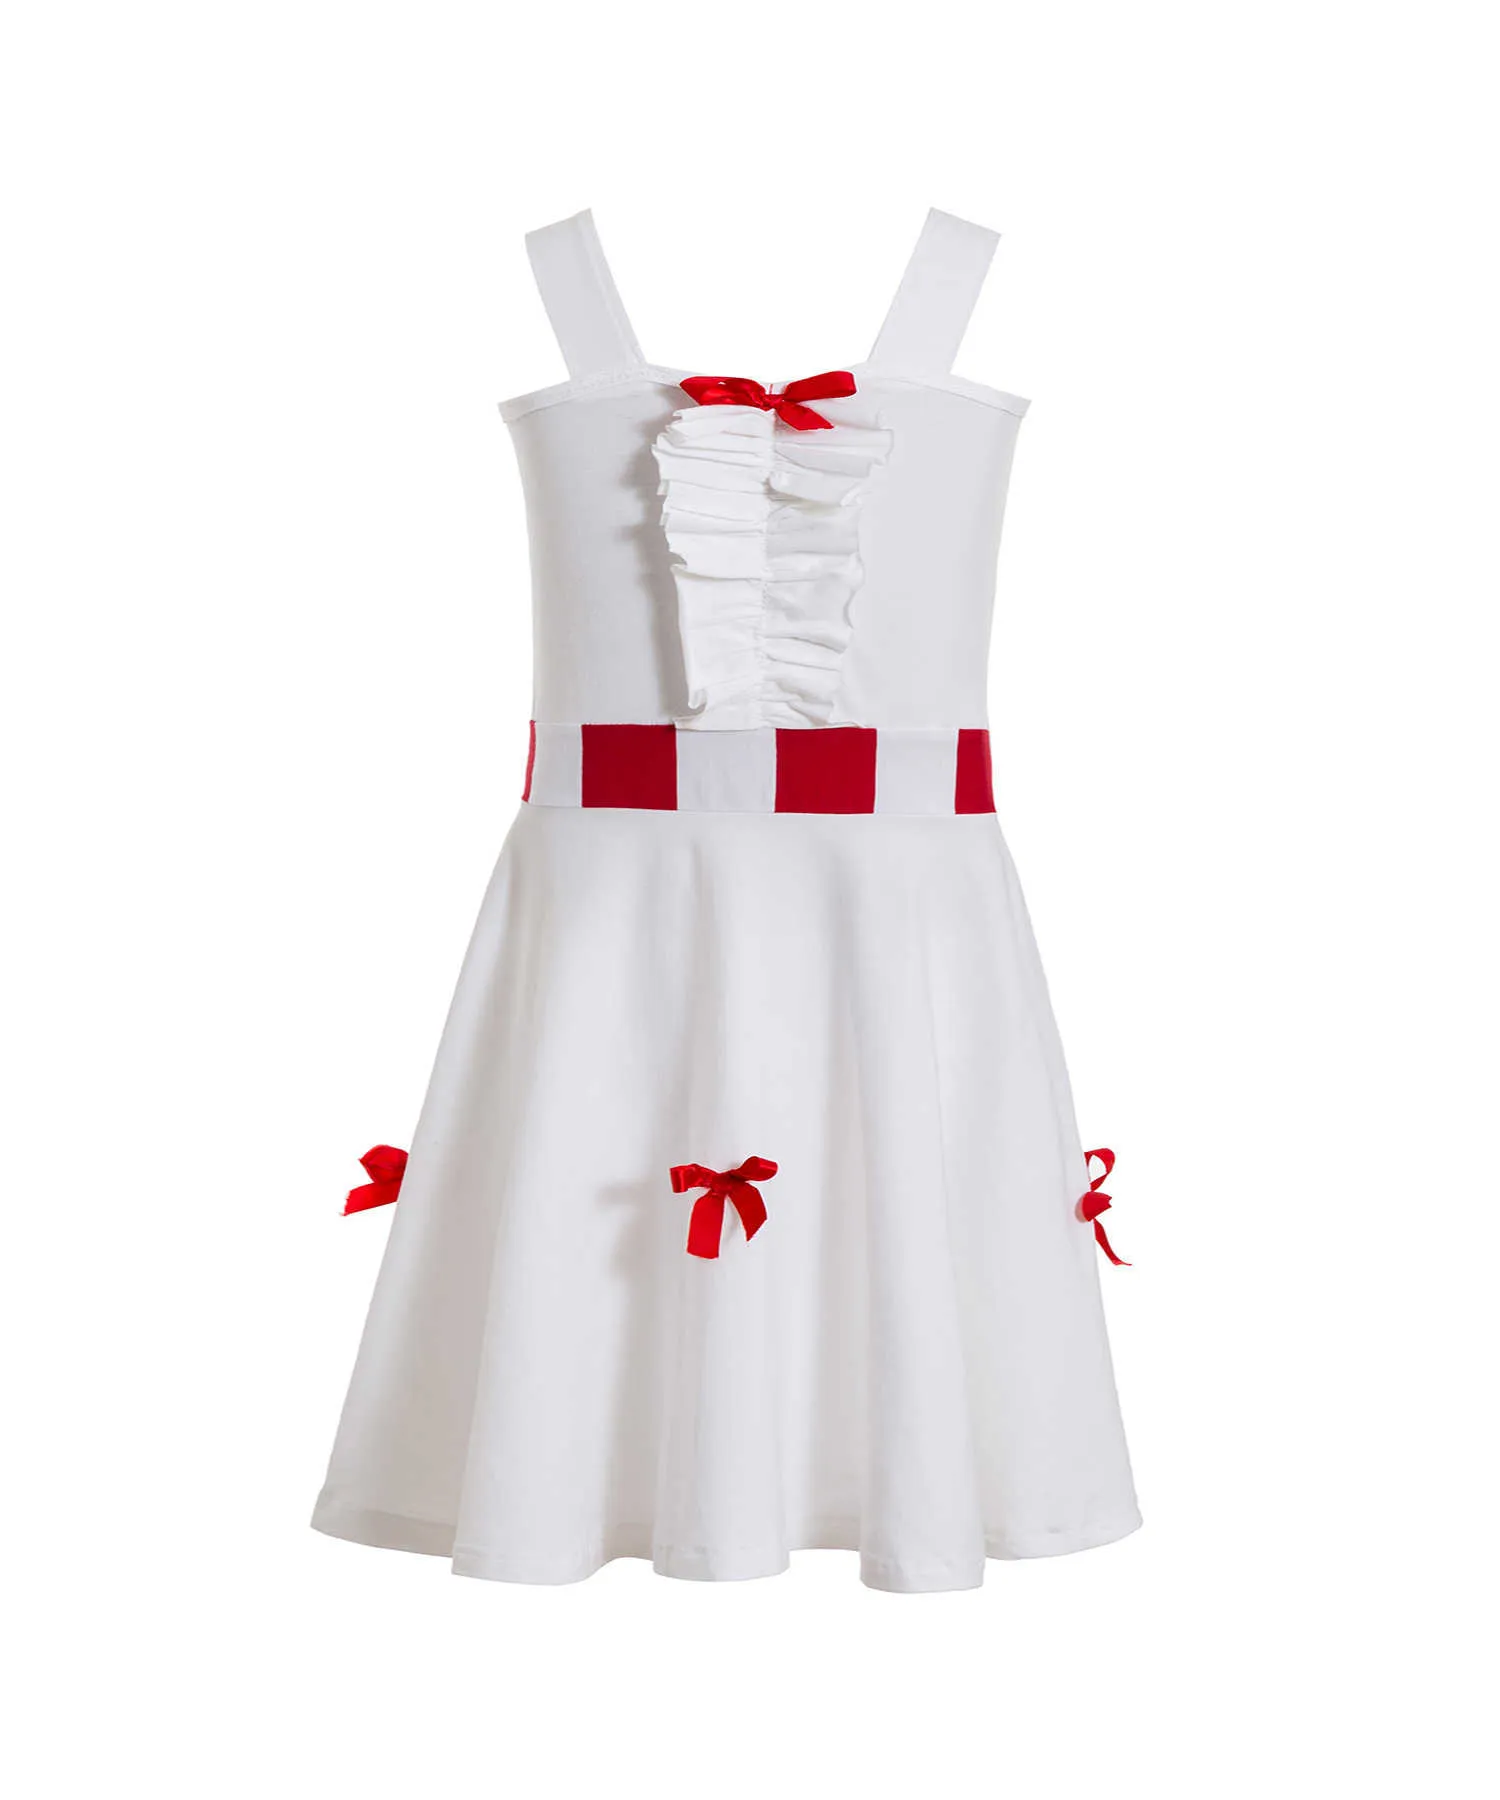 Costume blanc pour enfants Mary Princess Cosplay Nanny Dress Up Poppins Jolly Holiday Costume enfants vêtements filles robes Q0716